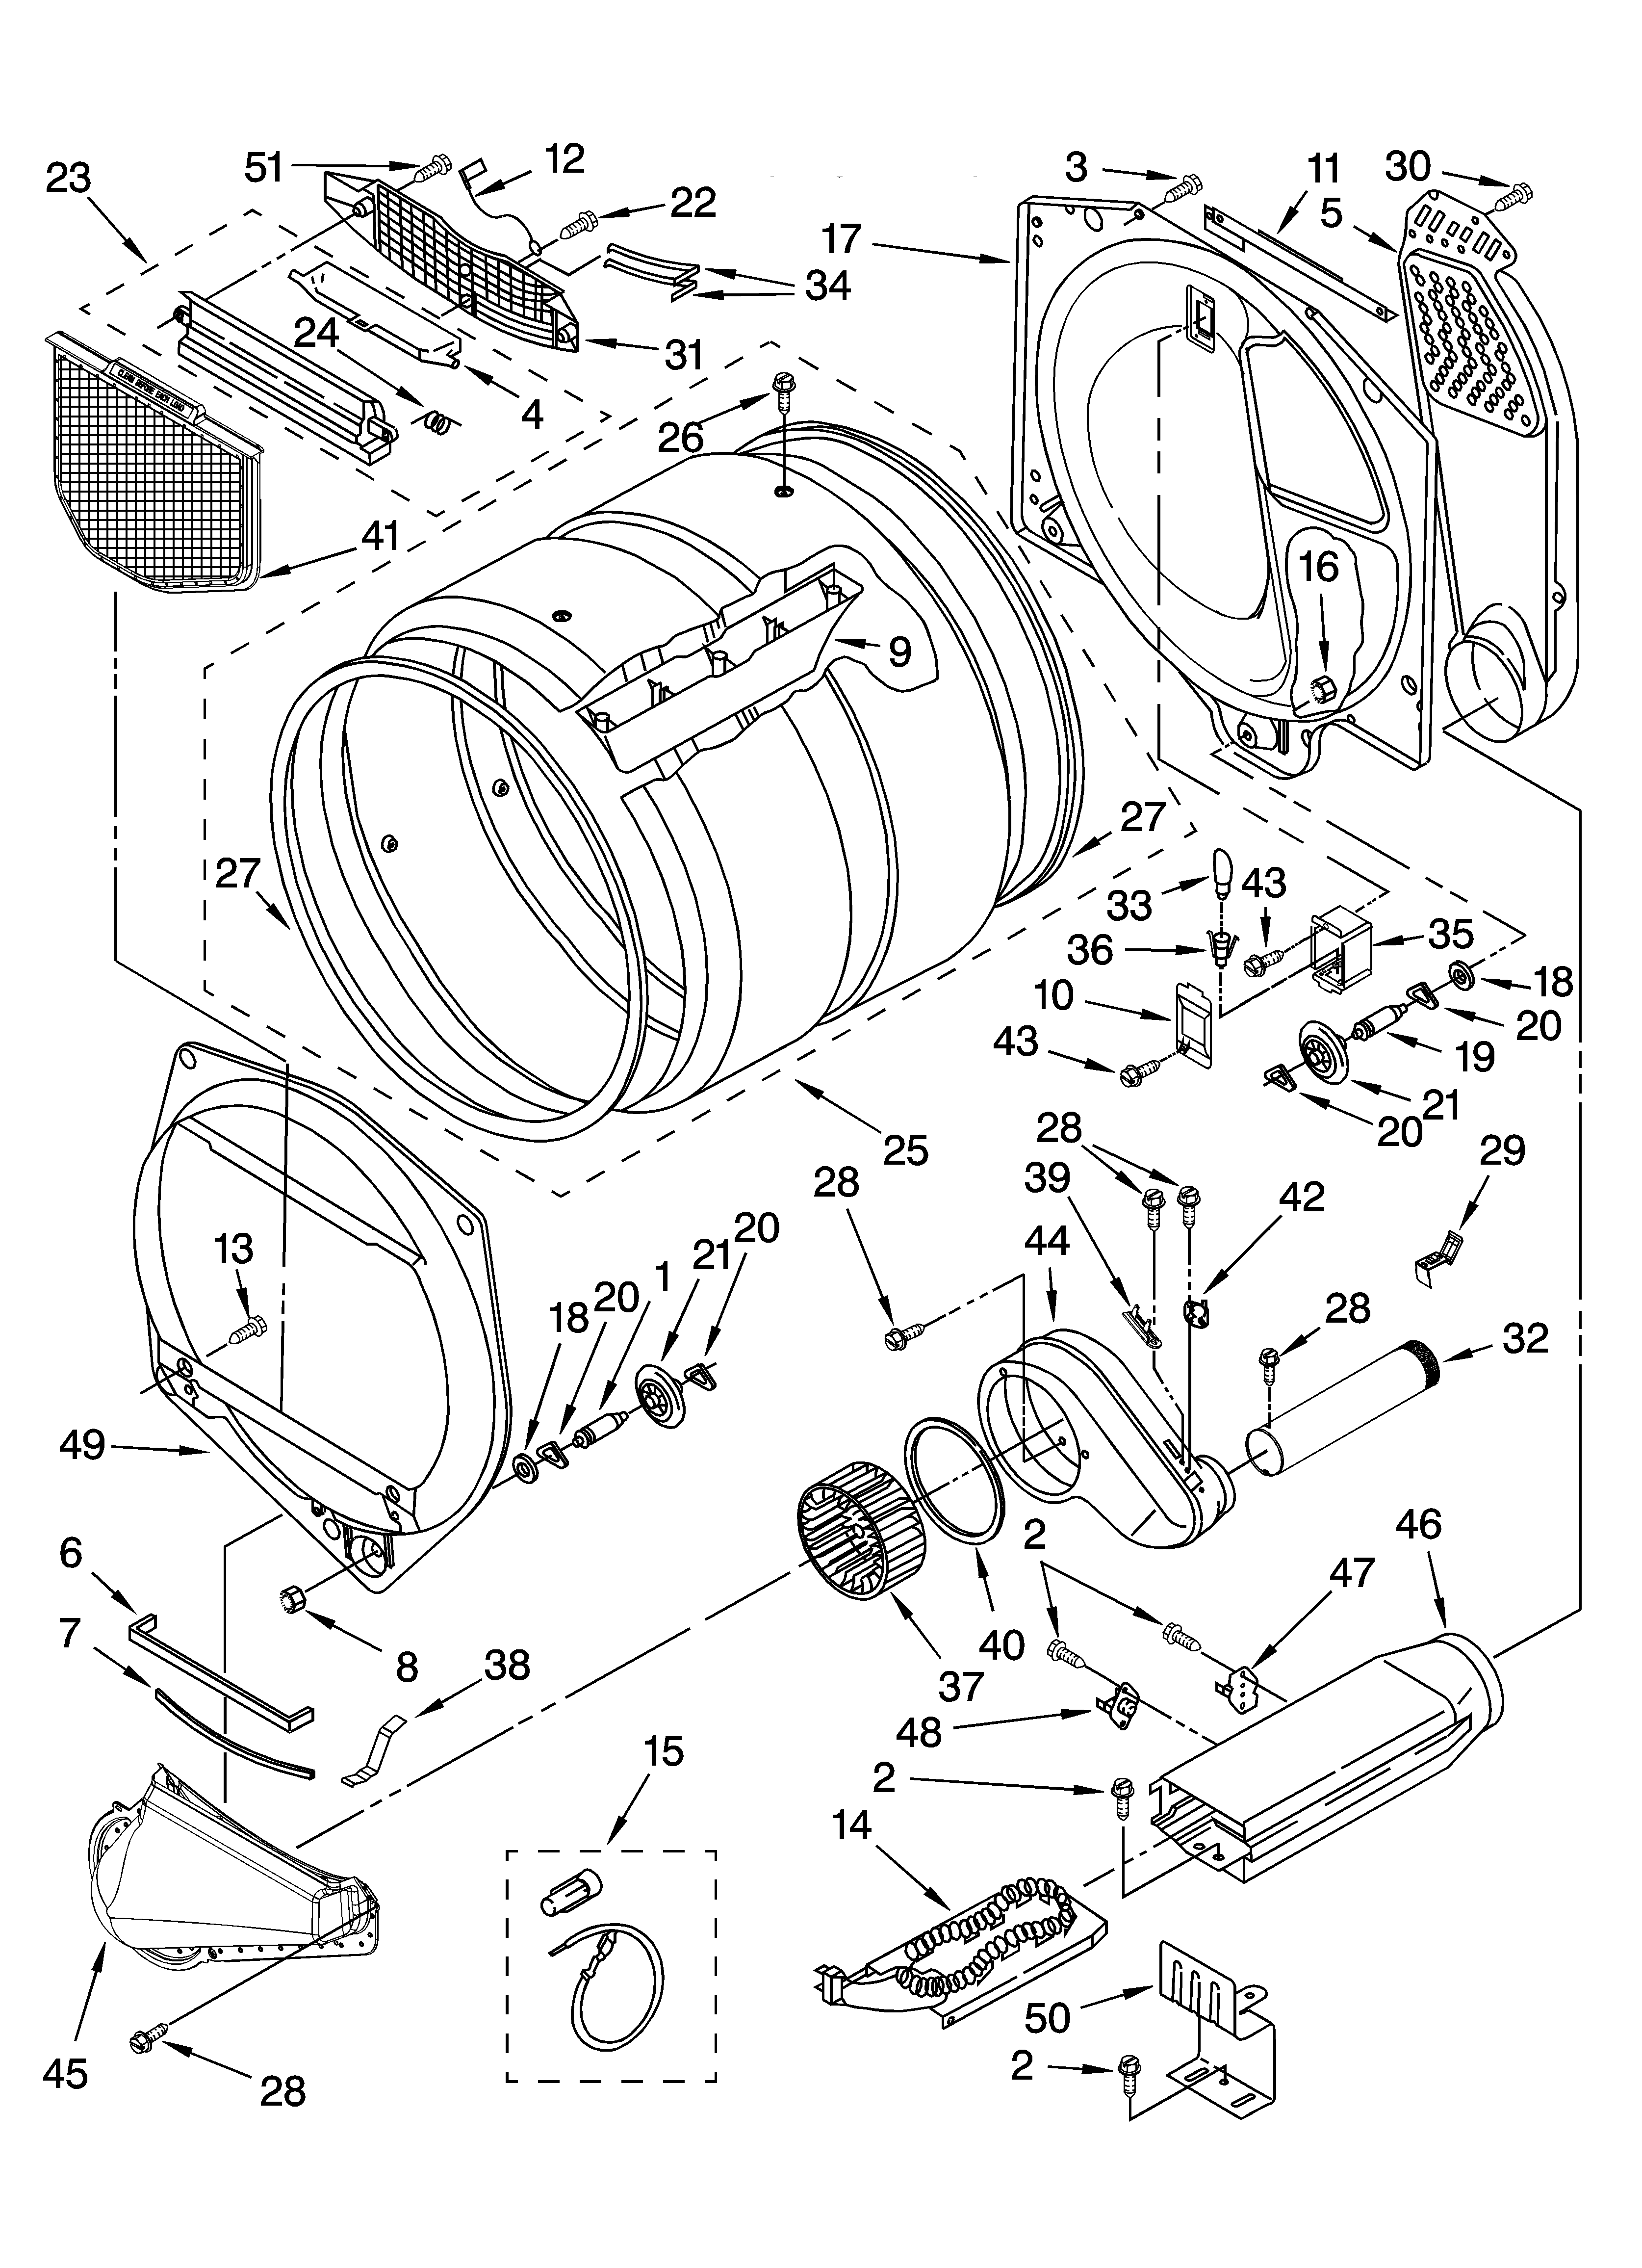 Wiring Diagram For Whirlpool Duet Dryer Heating Element from c.searspartsdirect.com